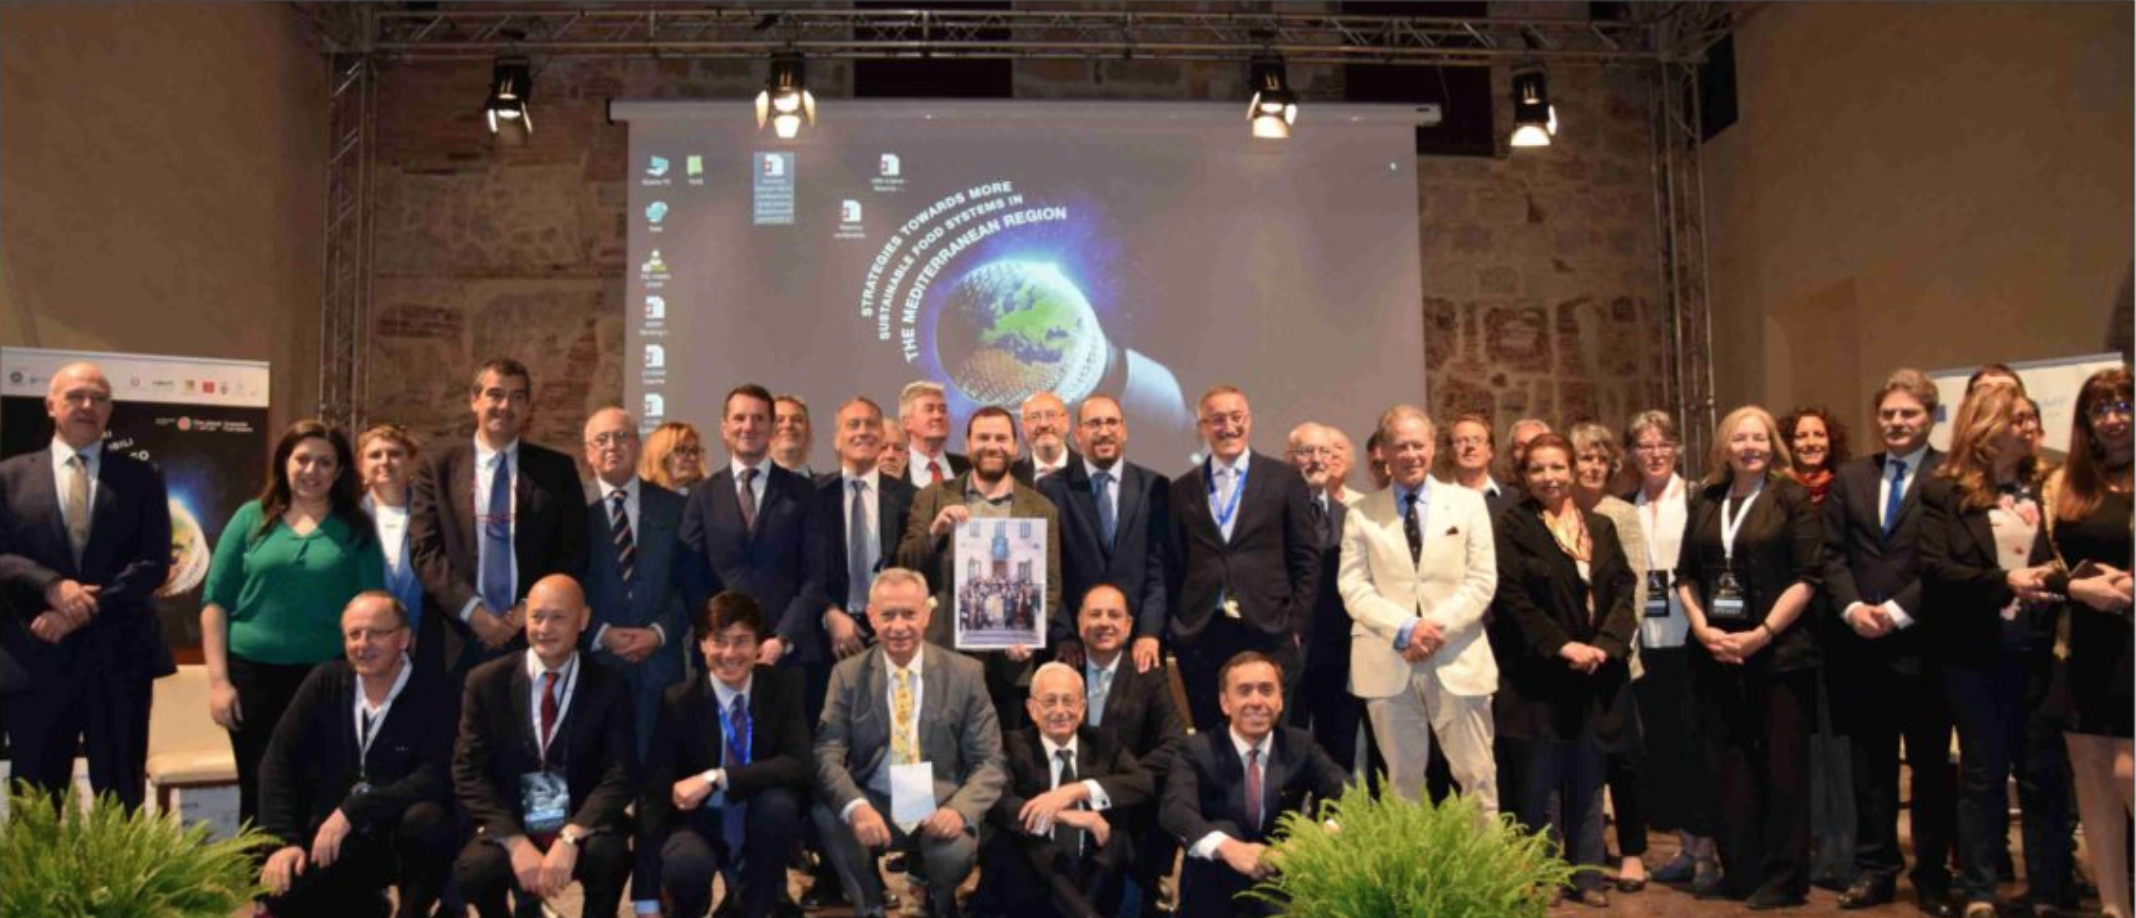 Second World Conference of the Revitalisation of the Mediterranean Diet